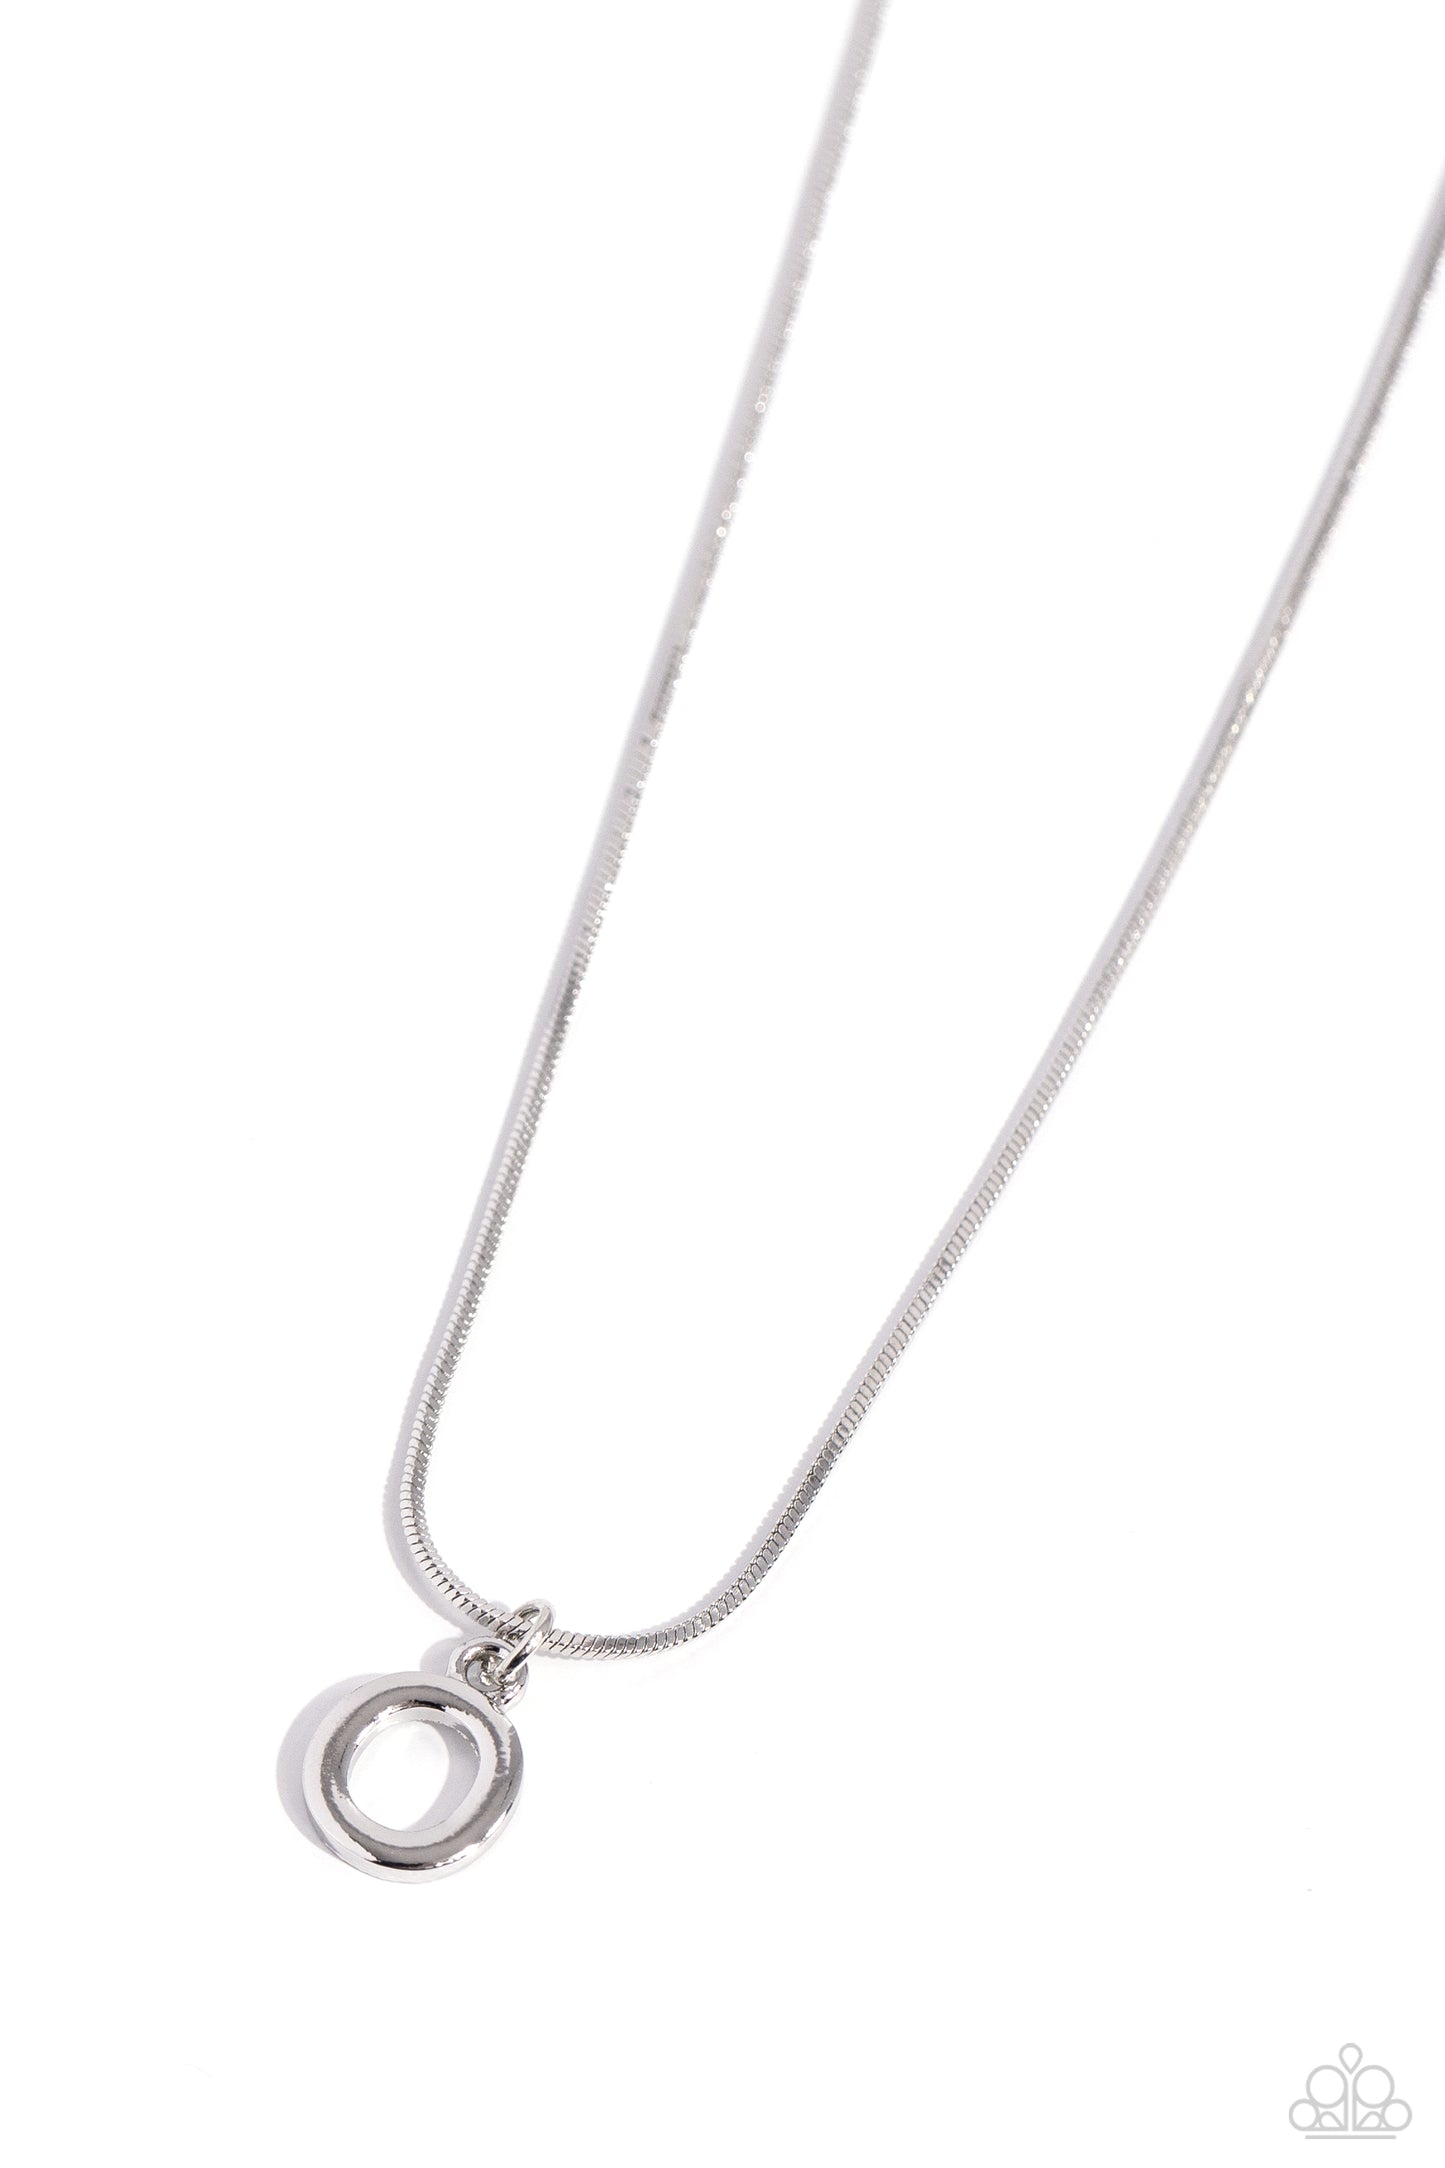 Seize the Initial Paparazzi Accessories Necklaces with Earrings - Silver - O